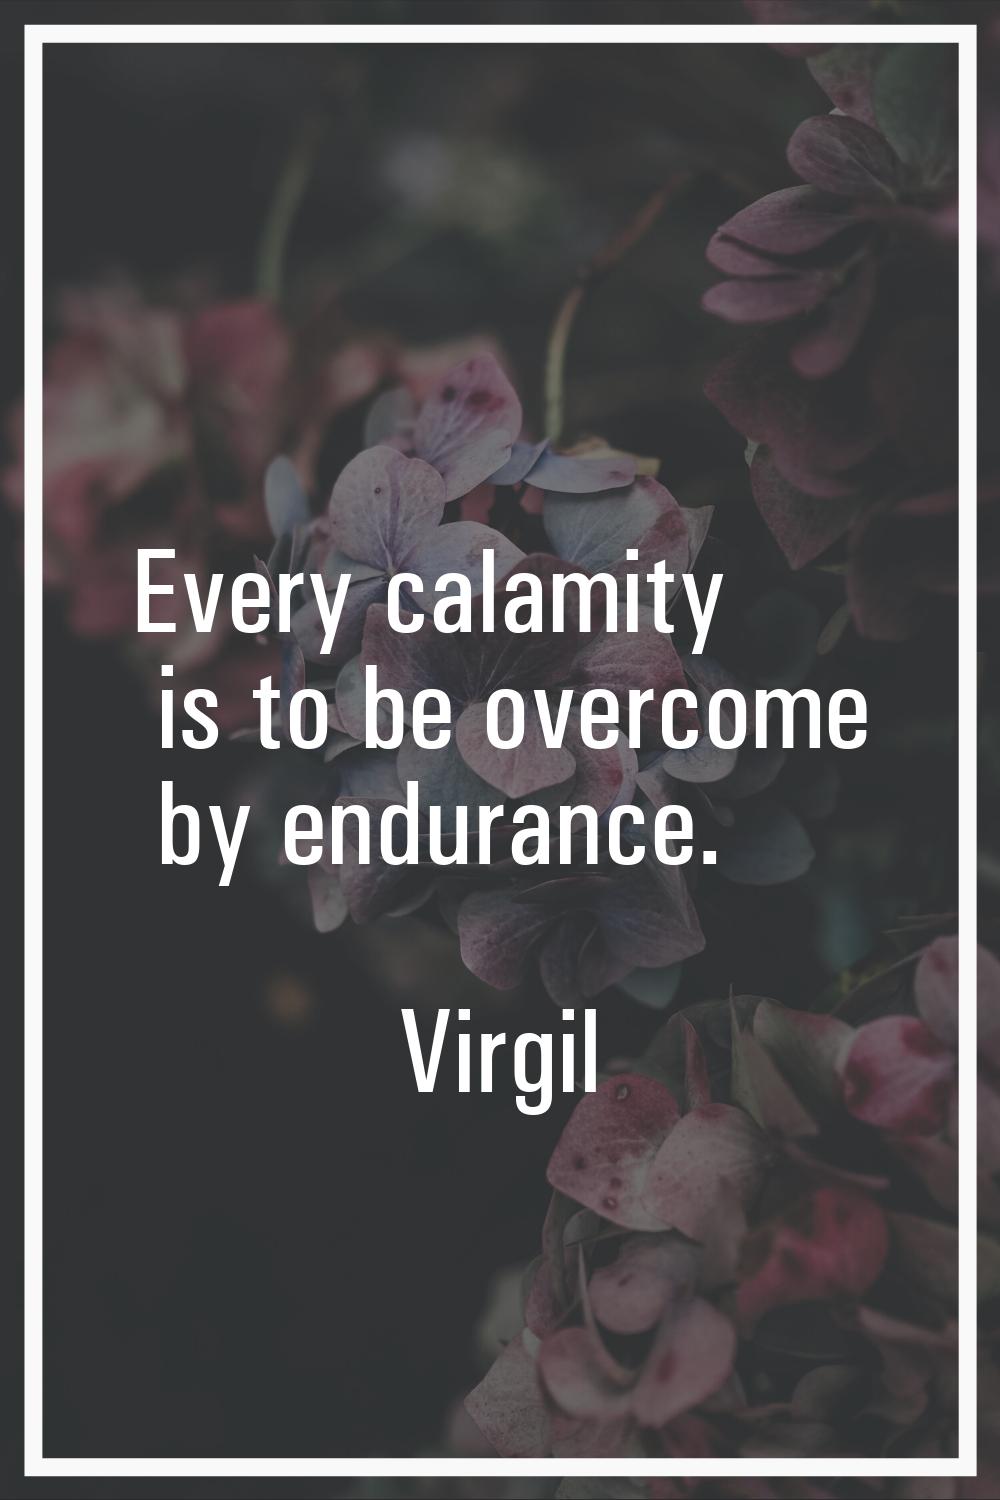 Every calamity is to be overcome by endurance.